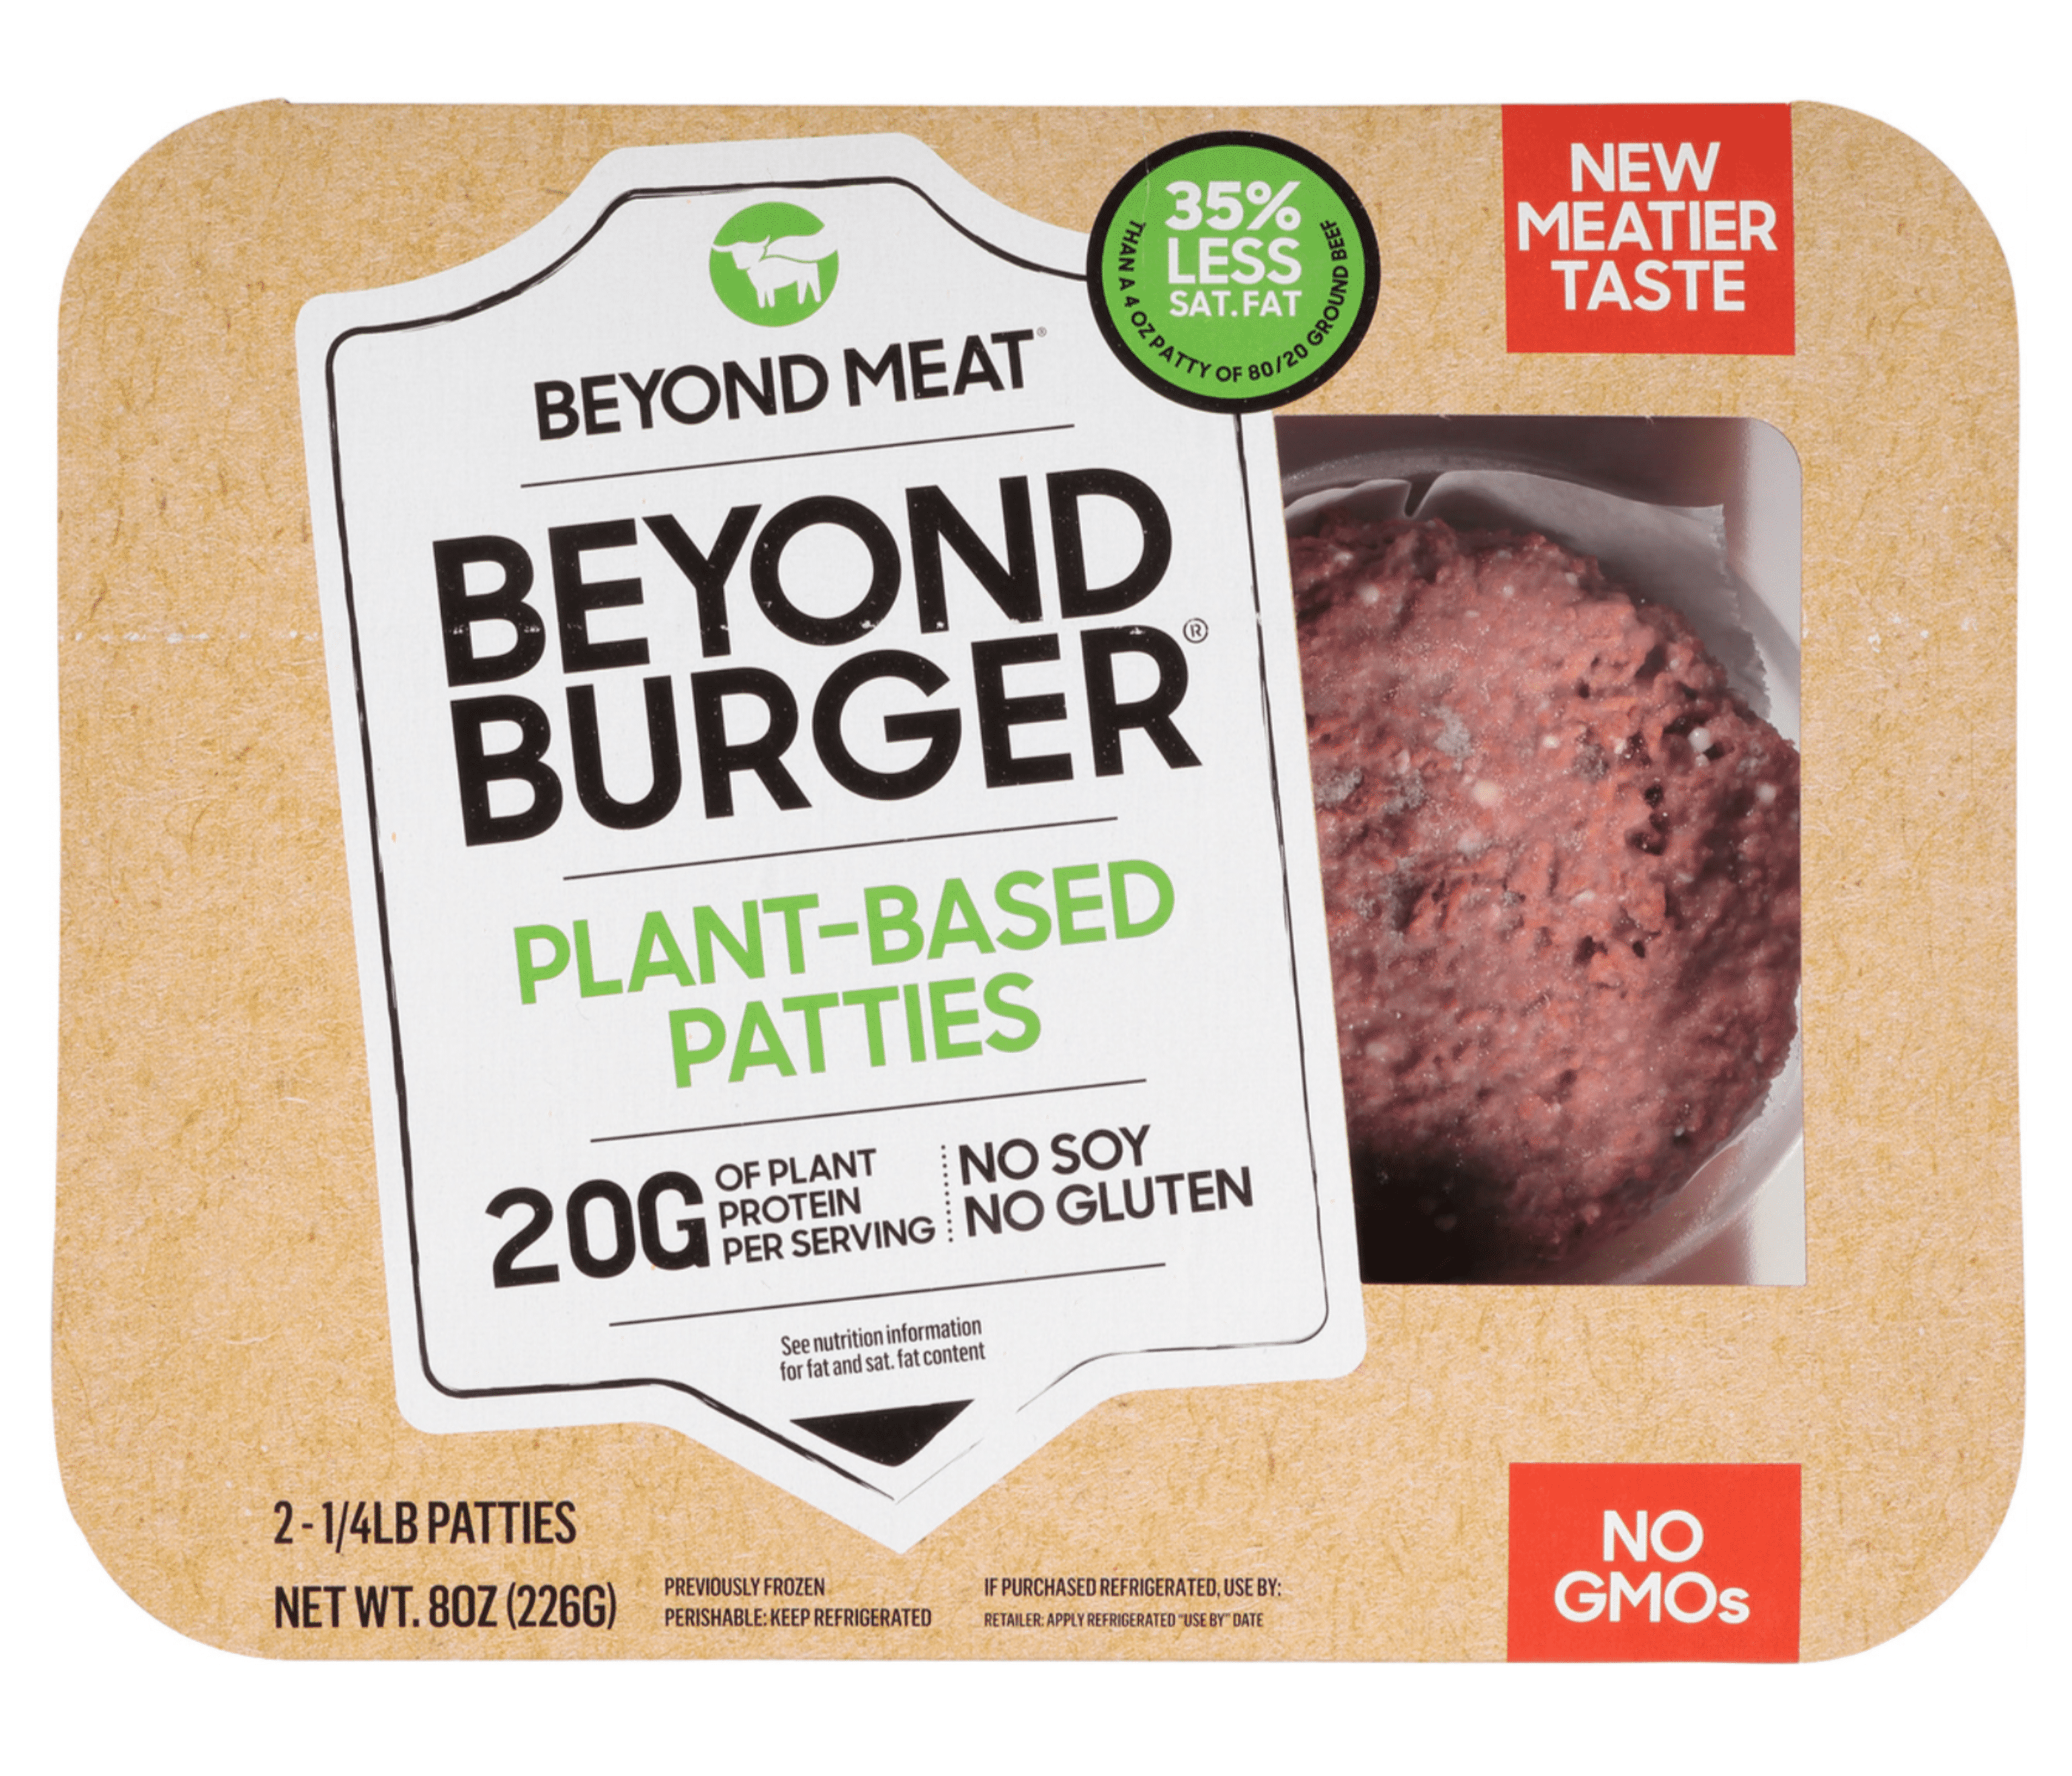 Burger by Beyond Meat Image 1 1